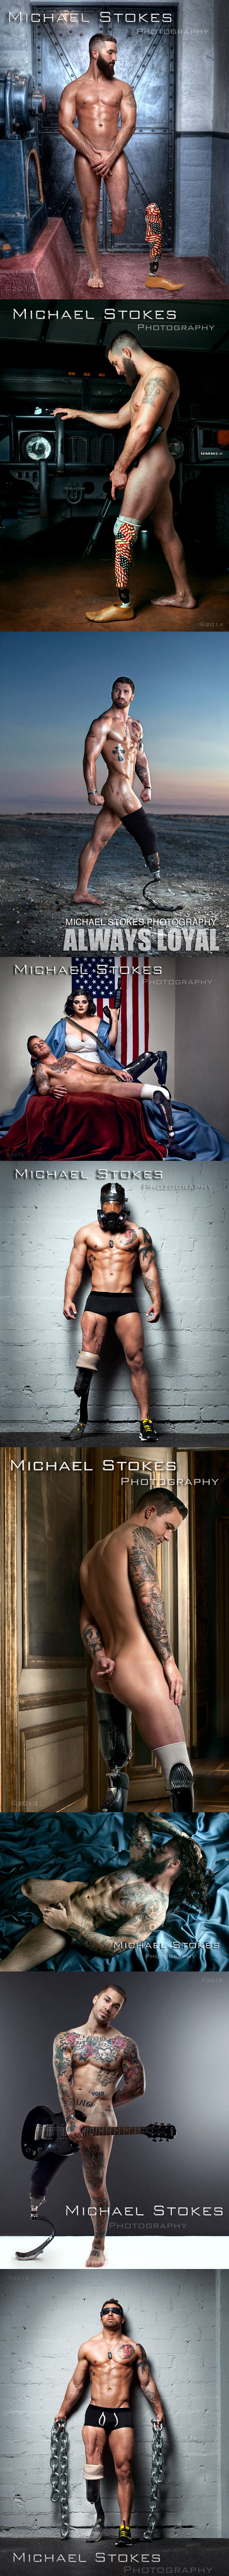 QC Arts: The Incredible Sexiness Of Brave Wounded Veterans